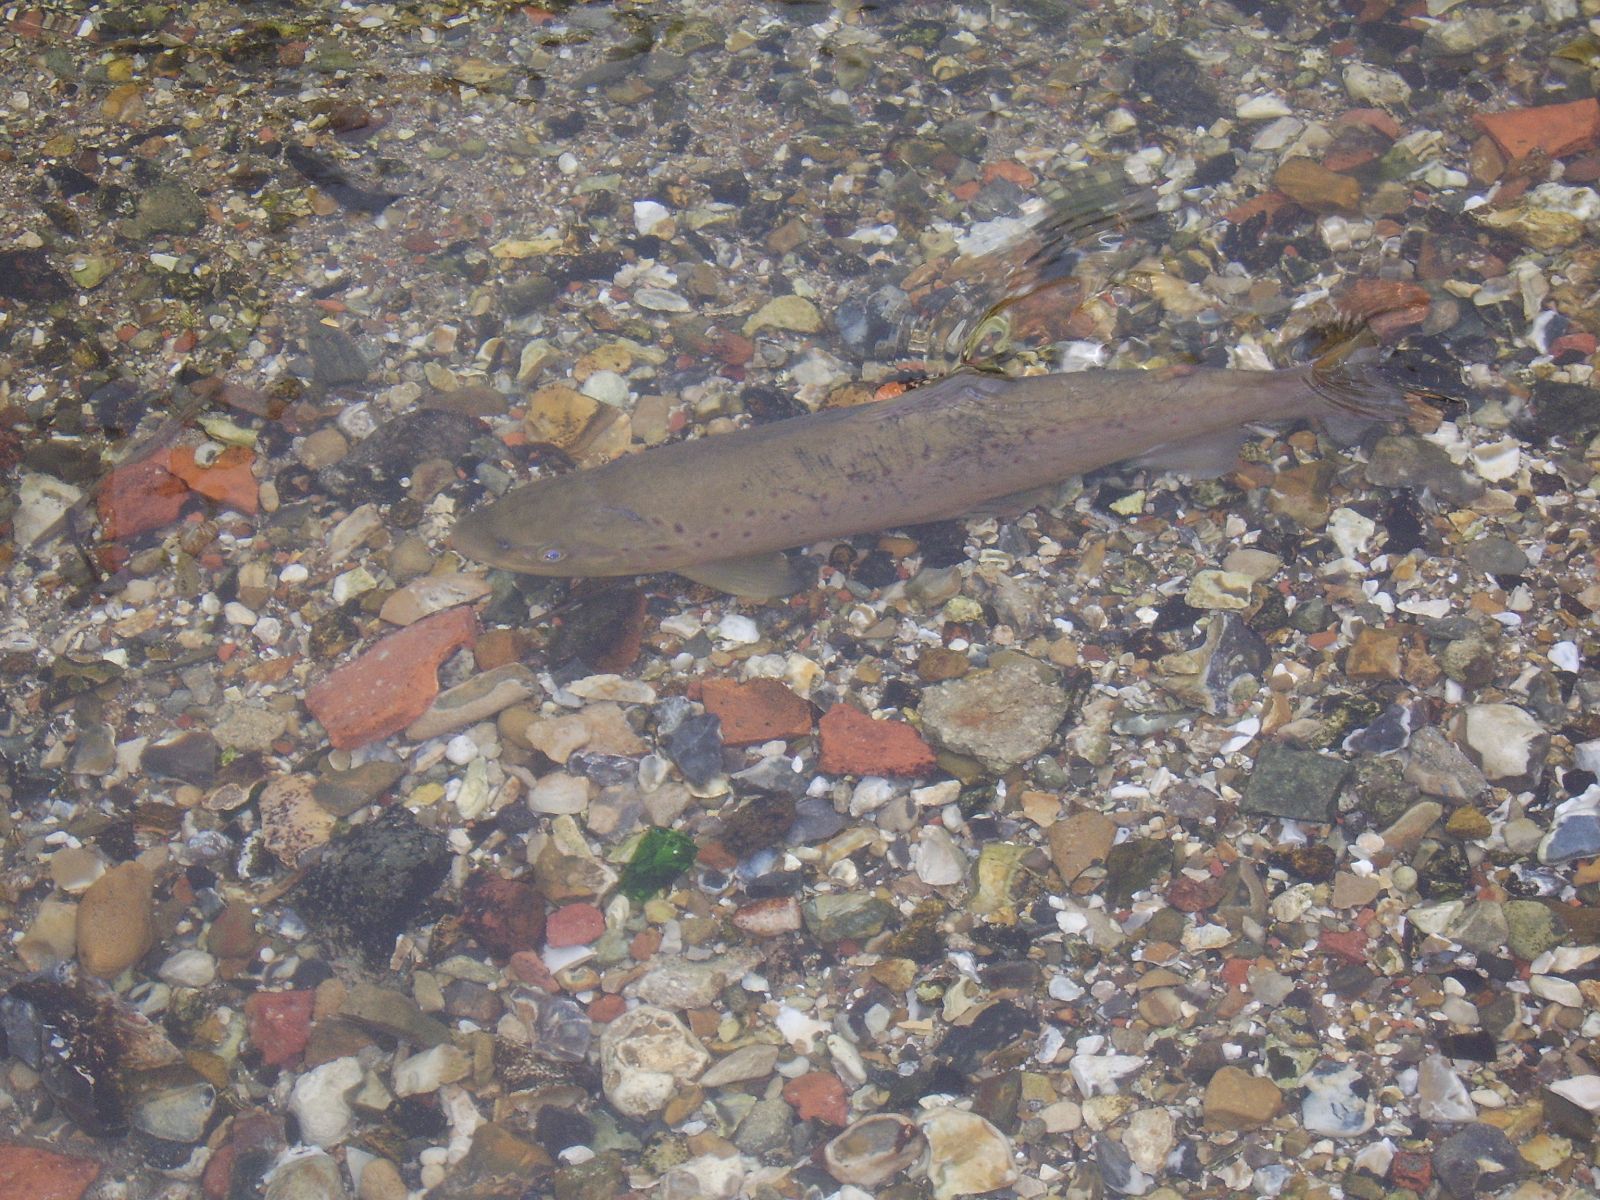 Brown Trout in the River Kennet